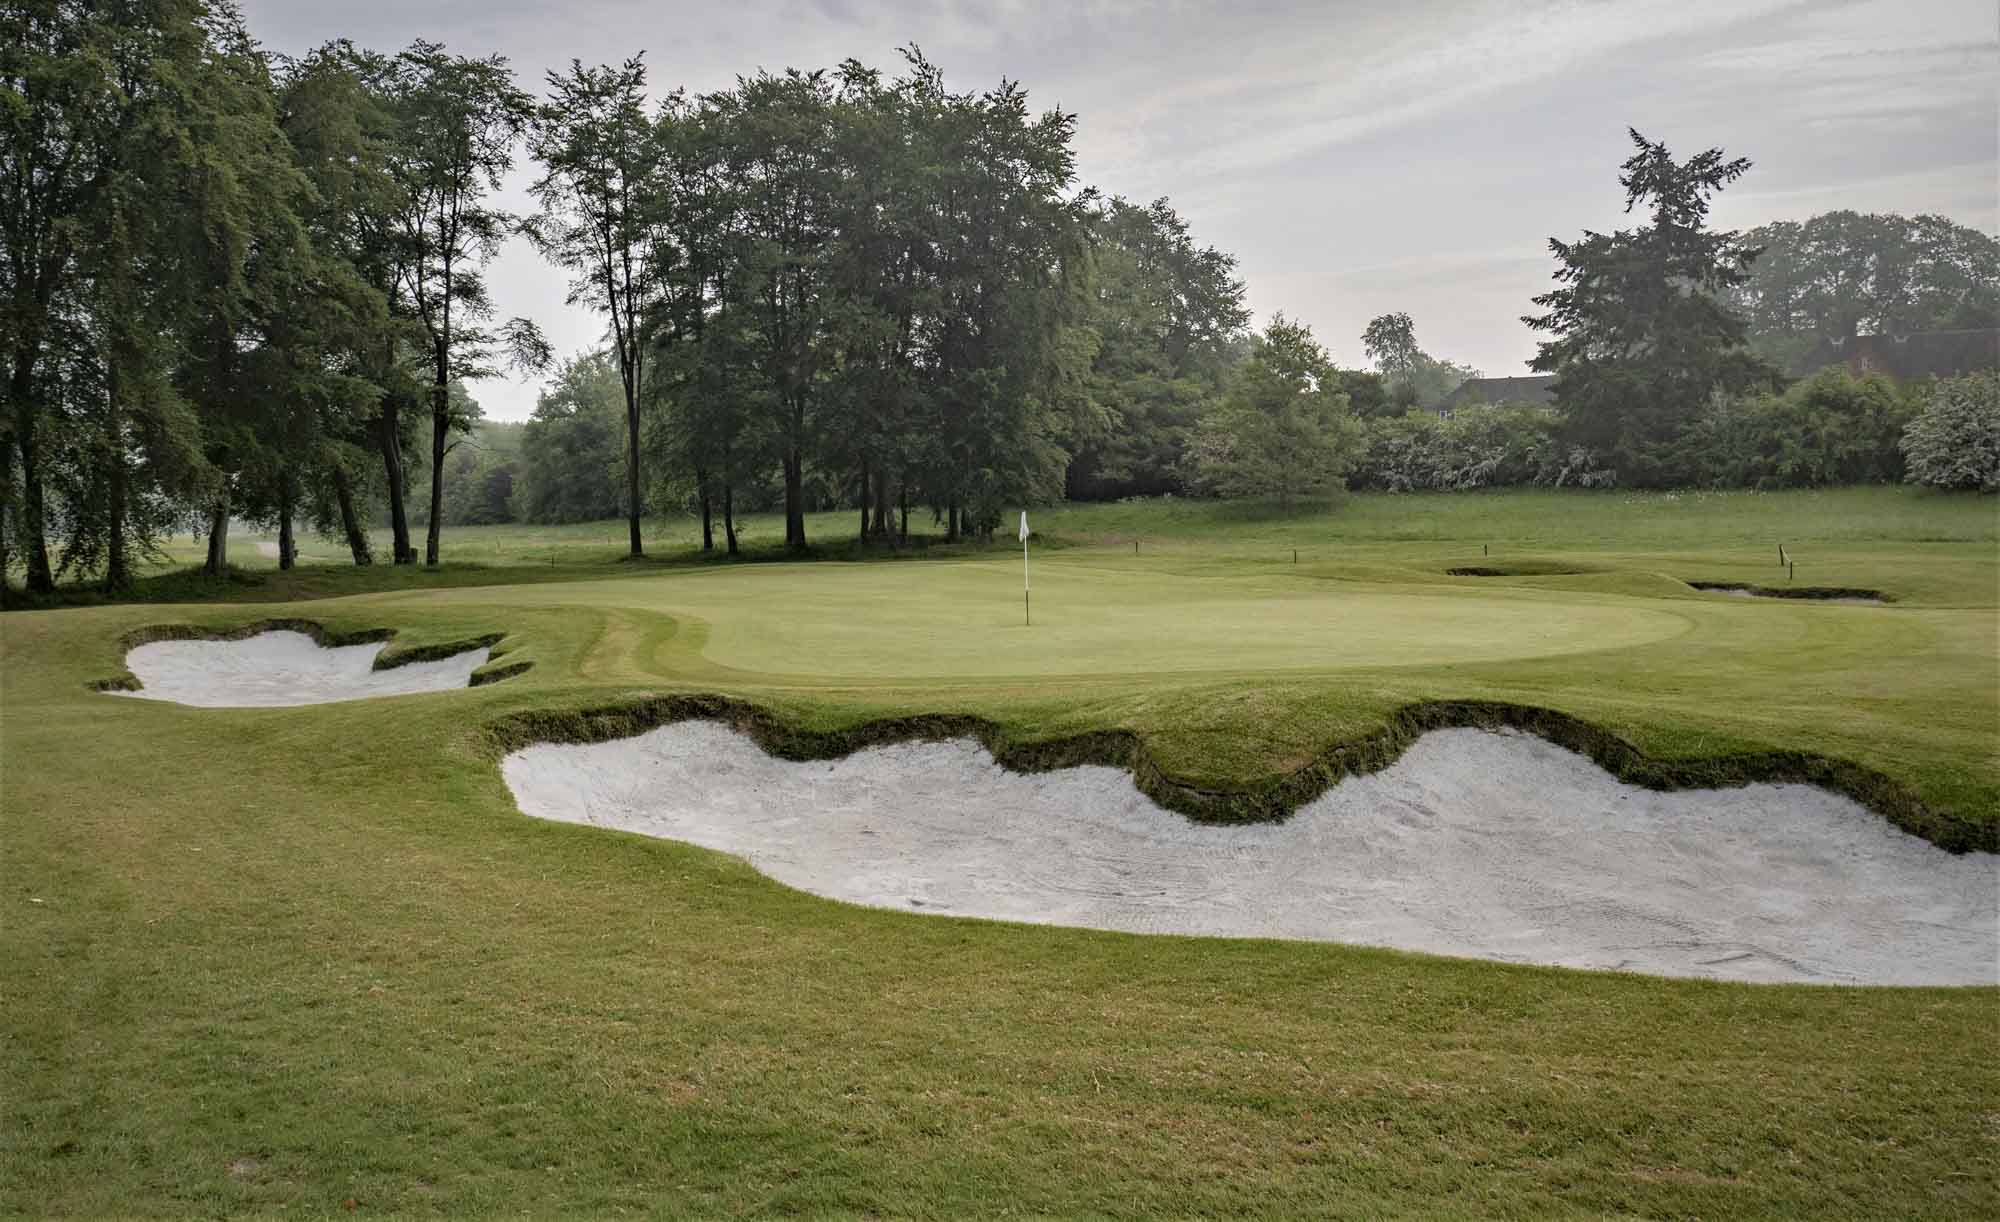 A photo of the new bunkering at A photo of the new bunkering at Effingham Golf Club.